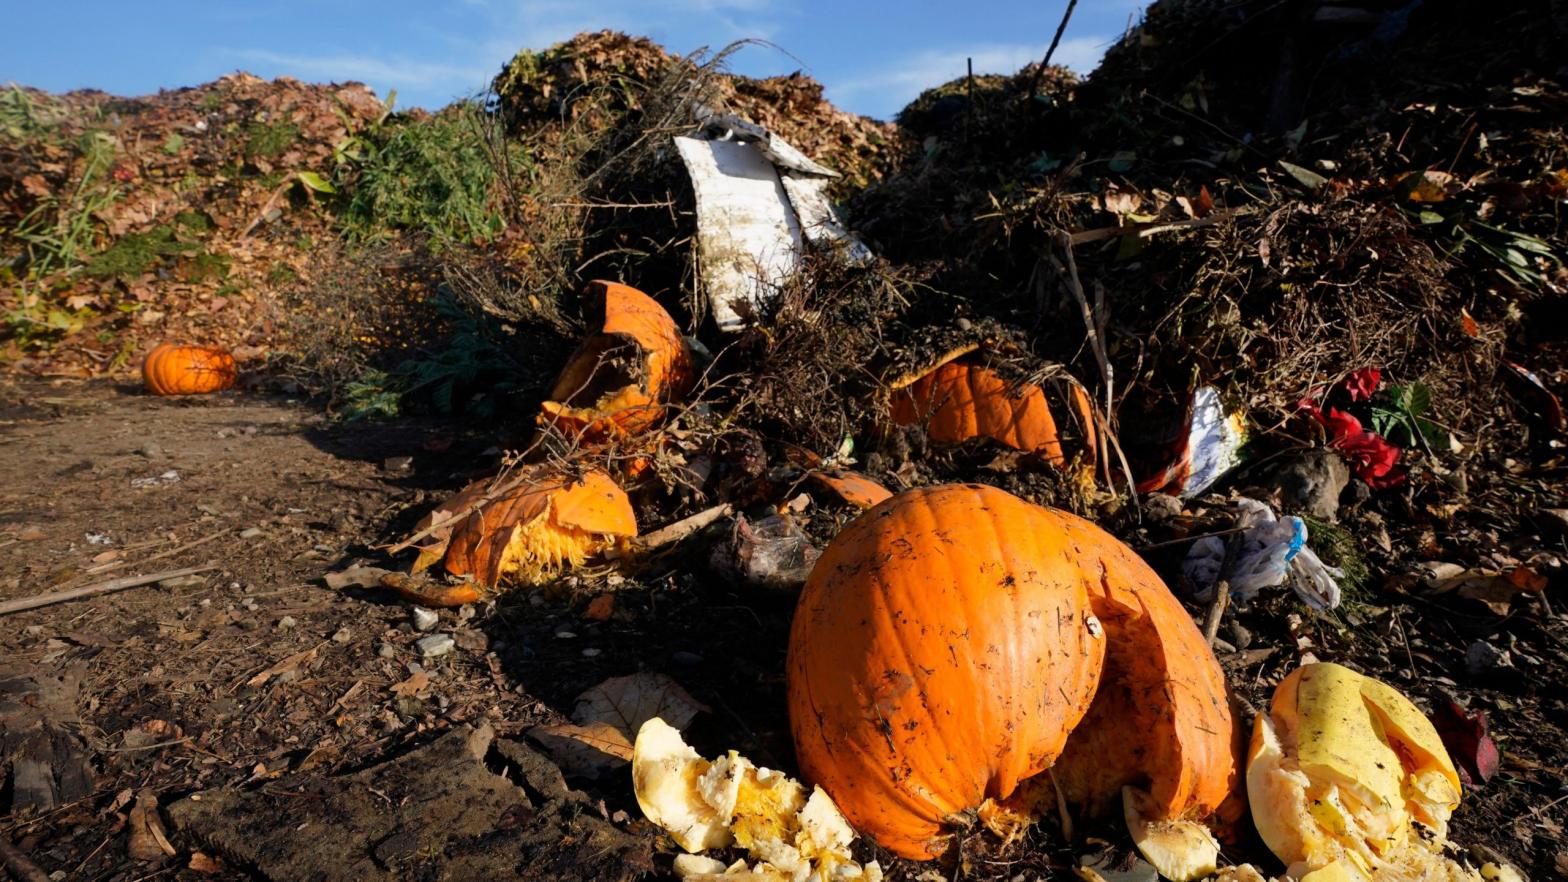 A pumpkin sits in front of other garden waste at an anaerobic processing facility in Woodland, California. (Photo: Rich Pedroncelli, AP)